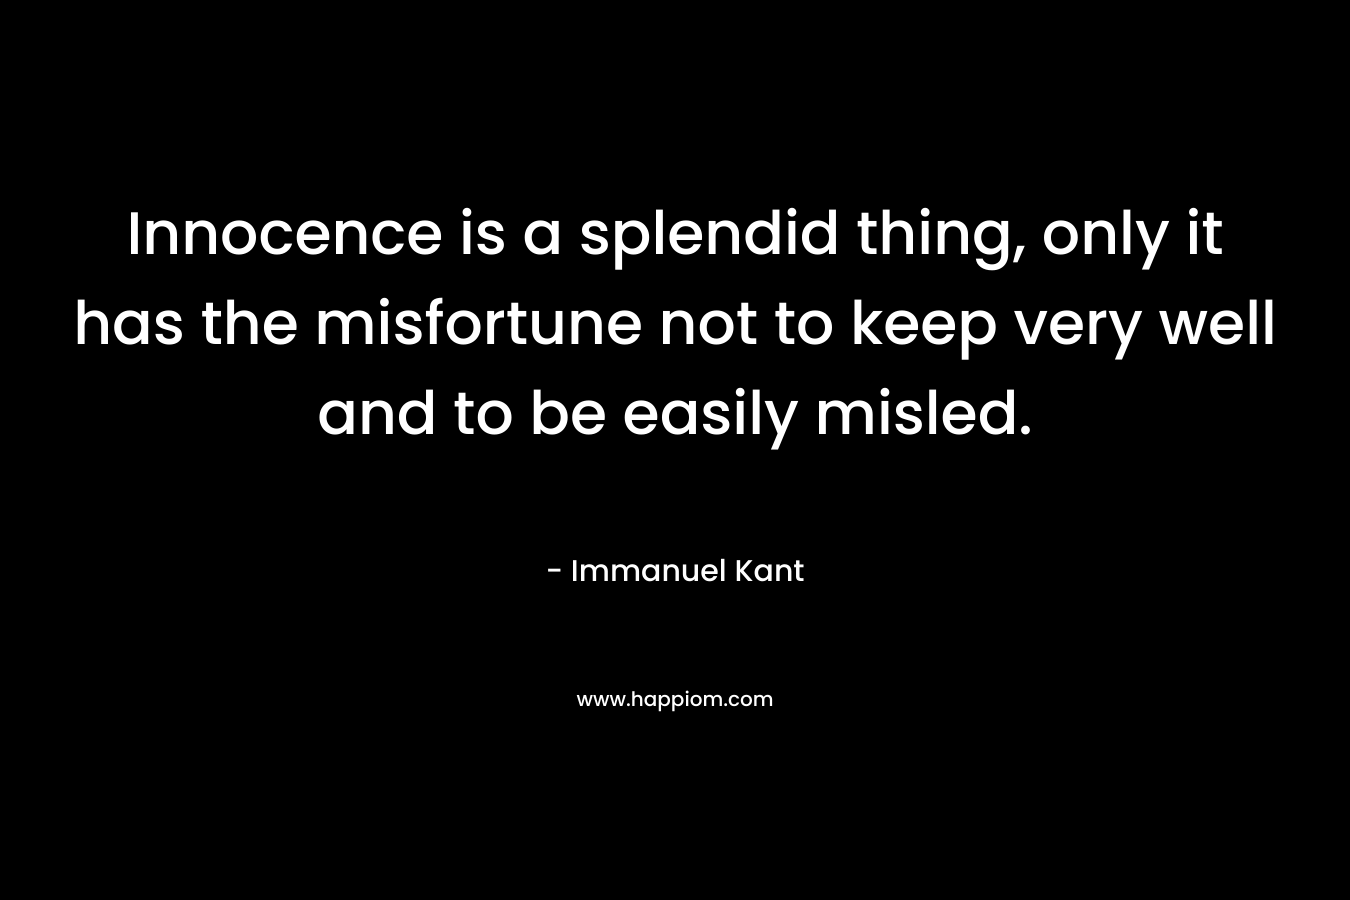 Innocence is a splendid thing, only it has the misfortune not to keep very well and to be easily misled. – Immanuel Kant